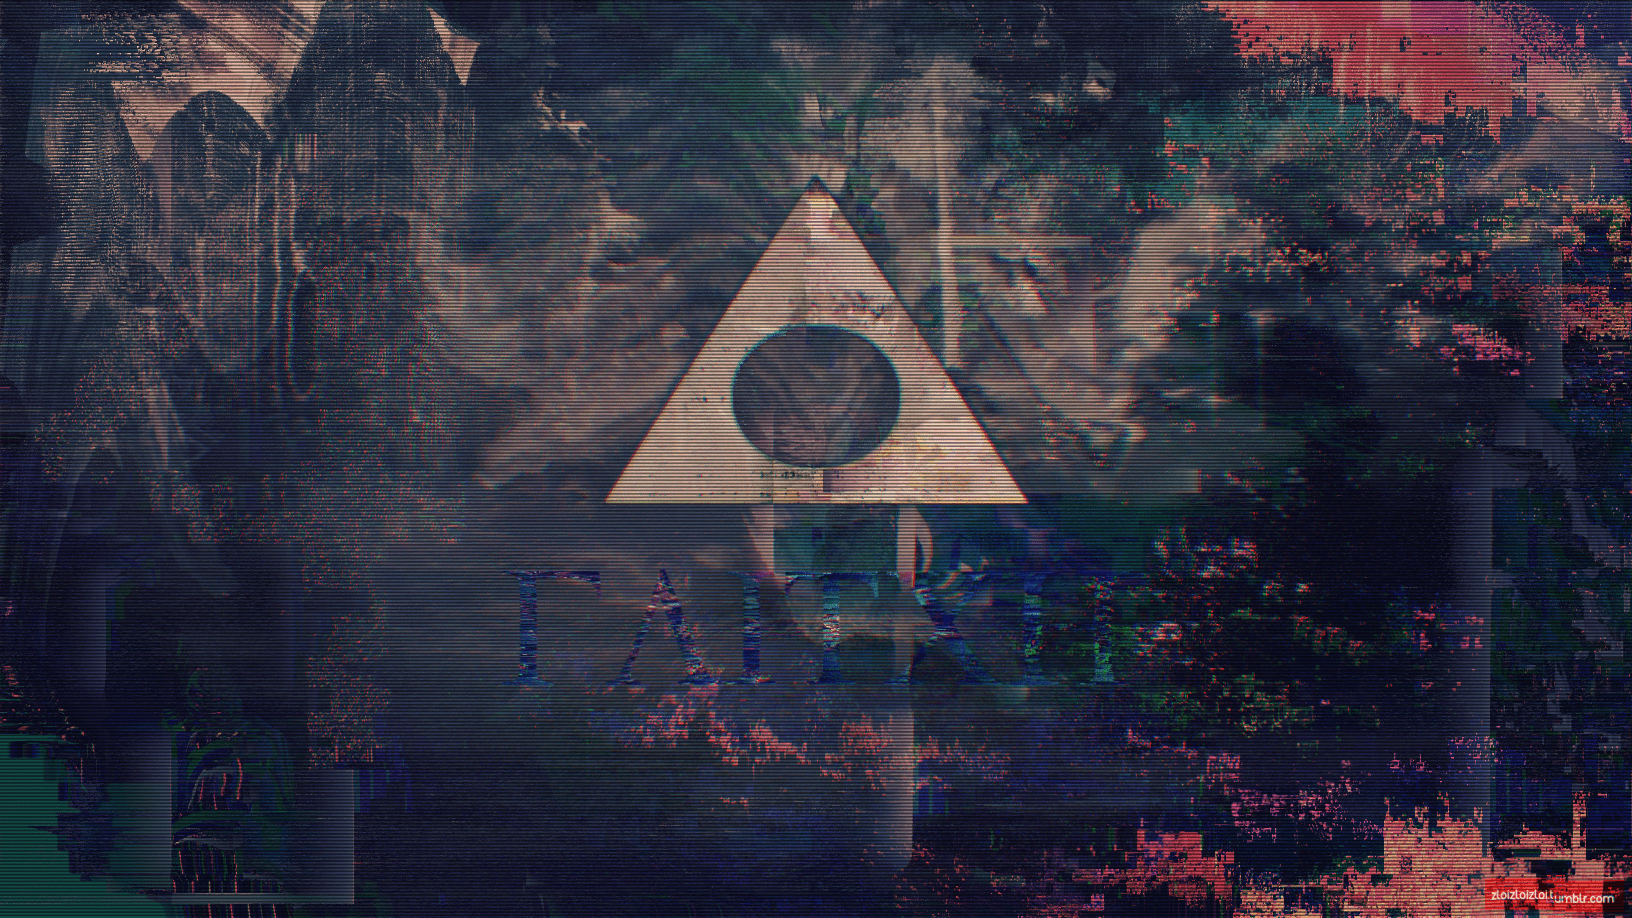 A picture of an image with trees and mountains - Black glitch, glitch, punk